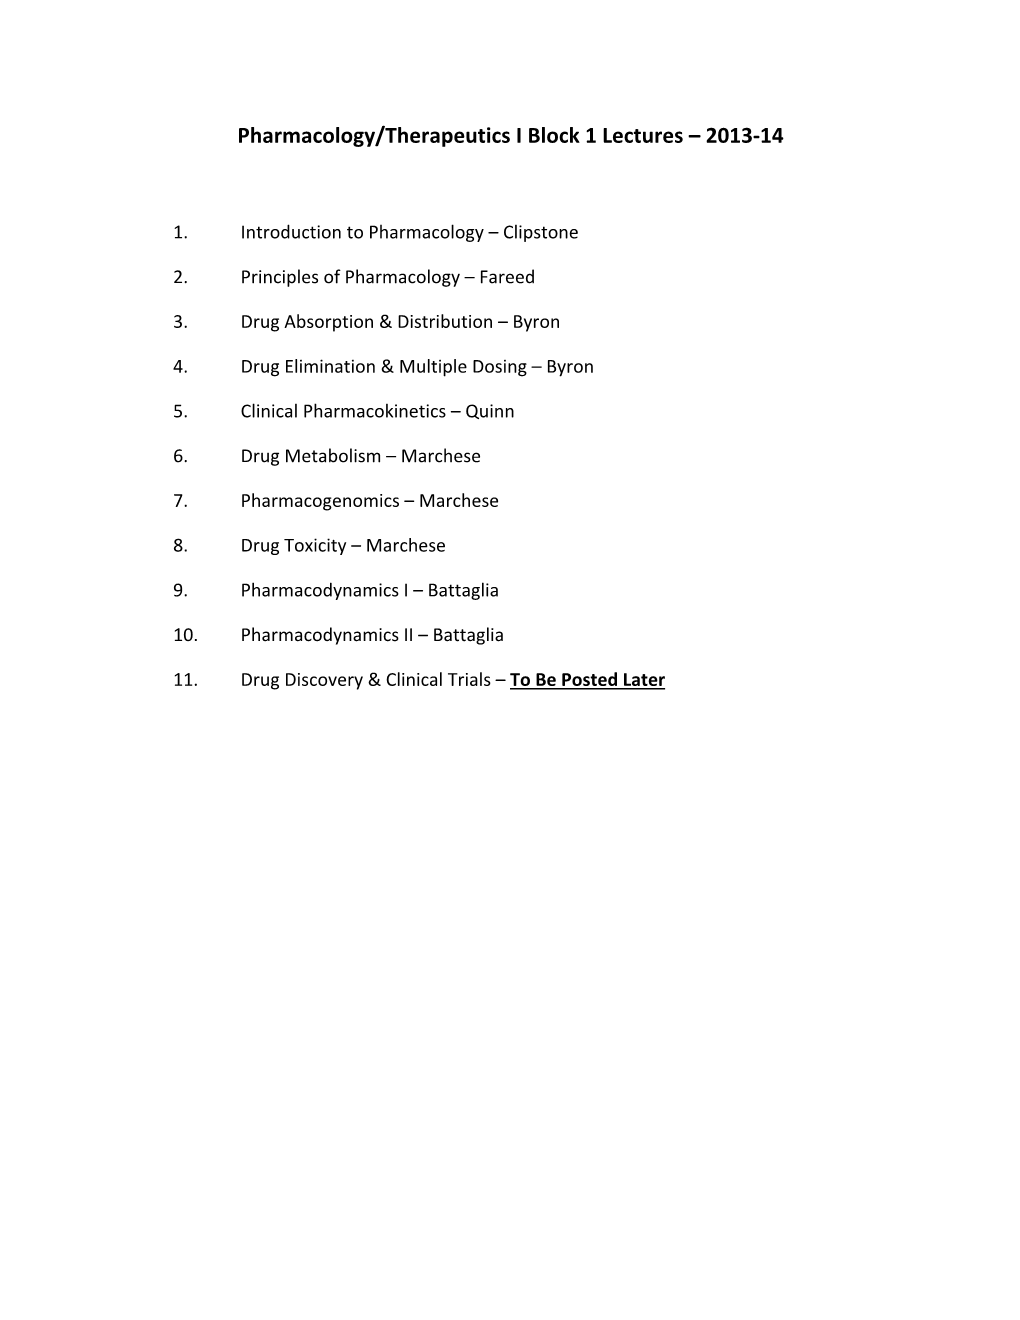 Pharmacology/Therapeutics I Block 1 Lectures – 2013-14